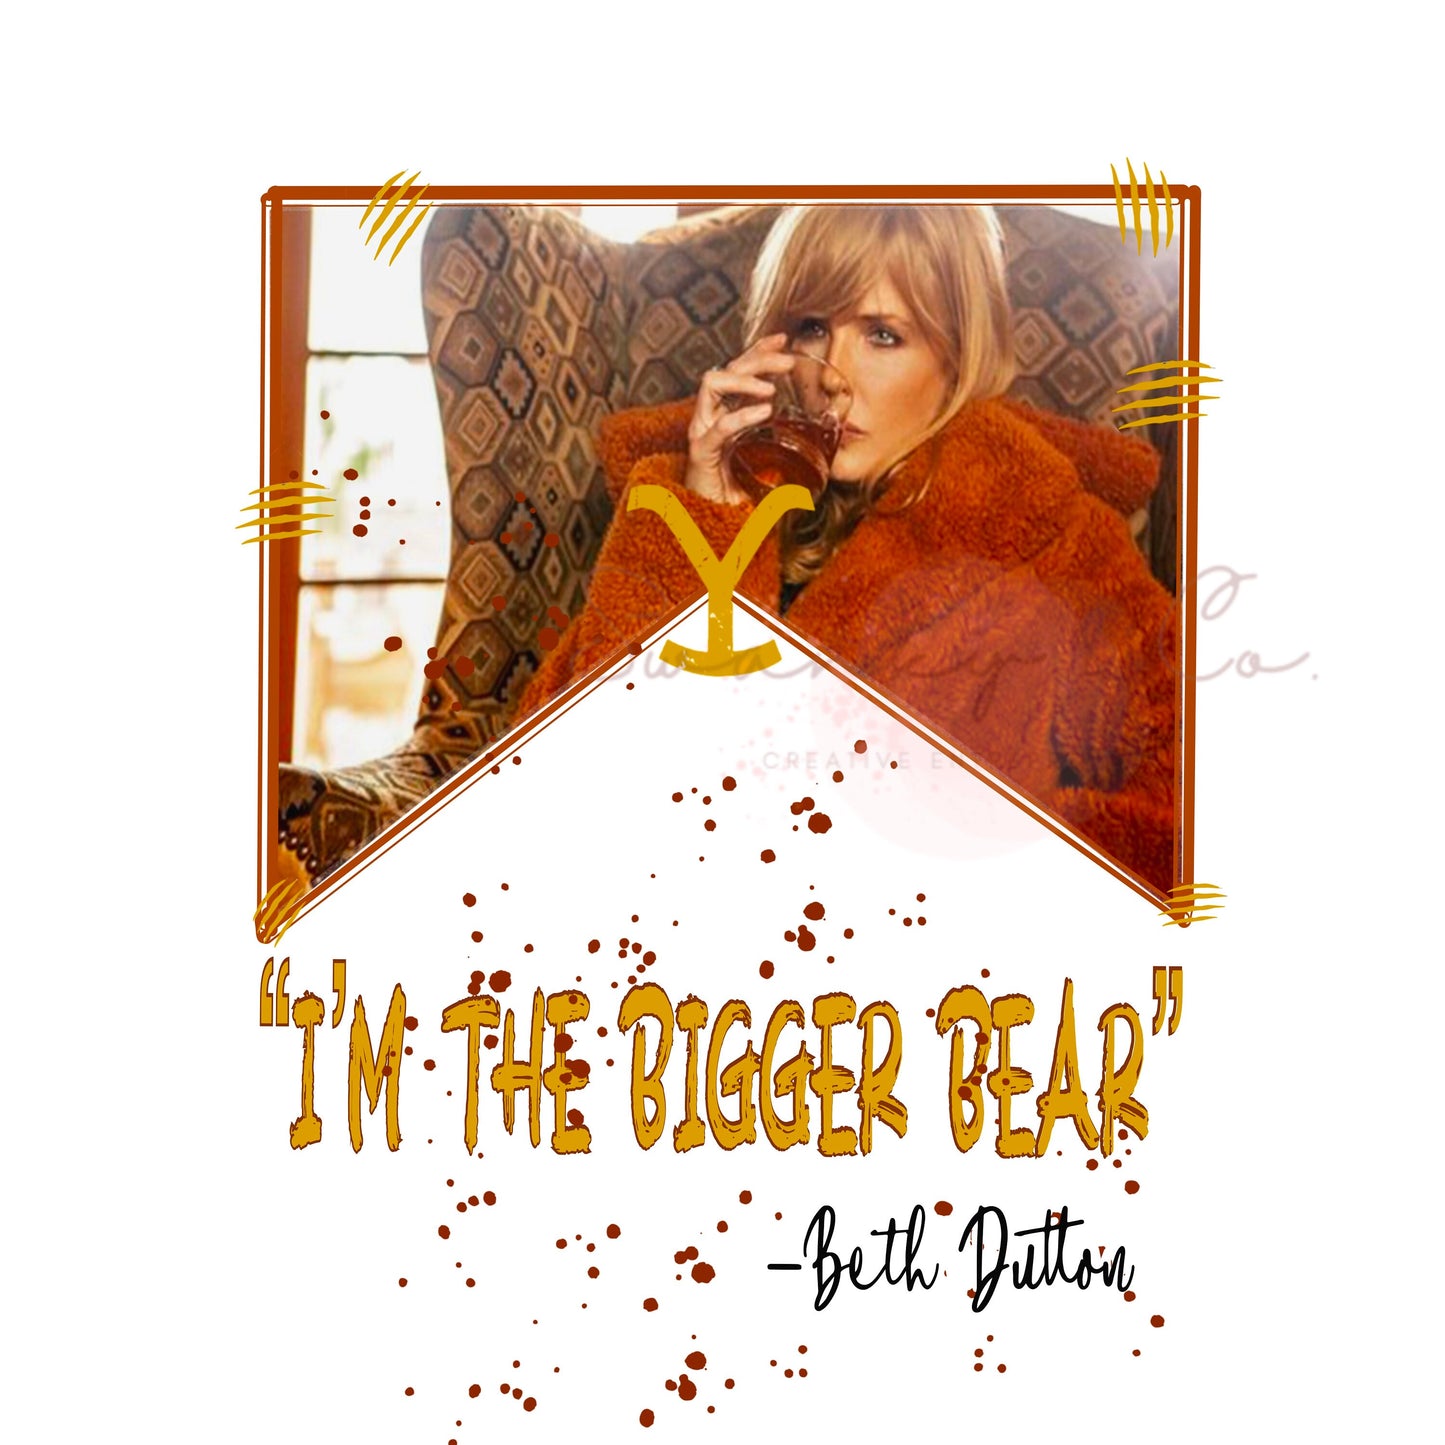 Yellowstone Png for Sublimation | Beth Dutton png| Bigger bear png| Digital Download